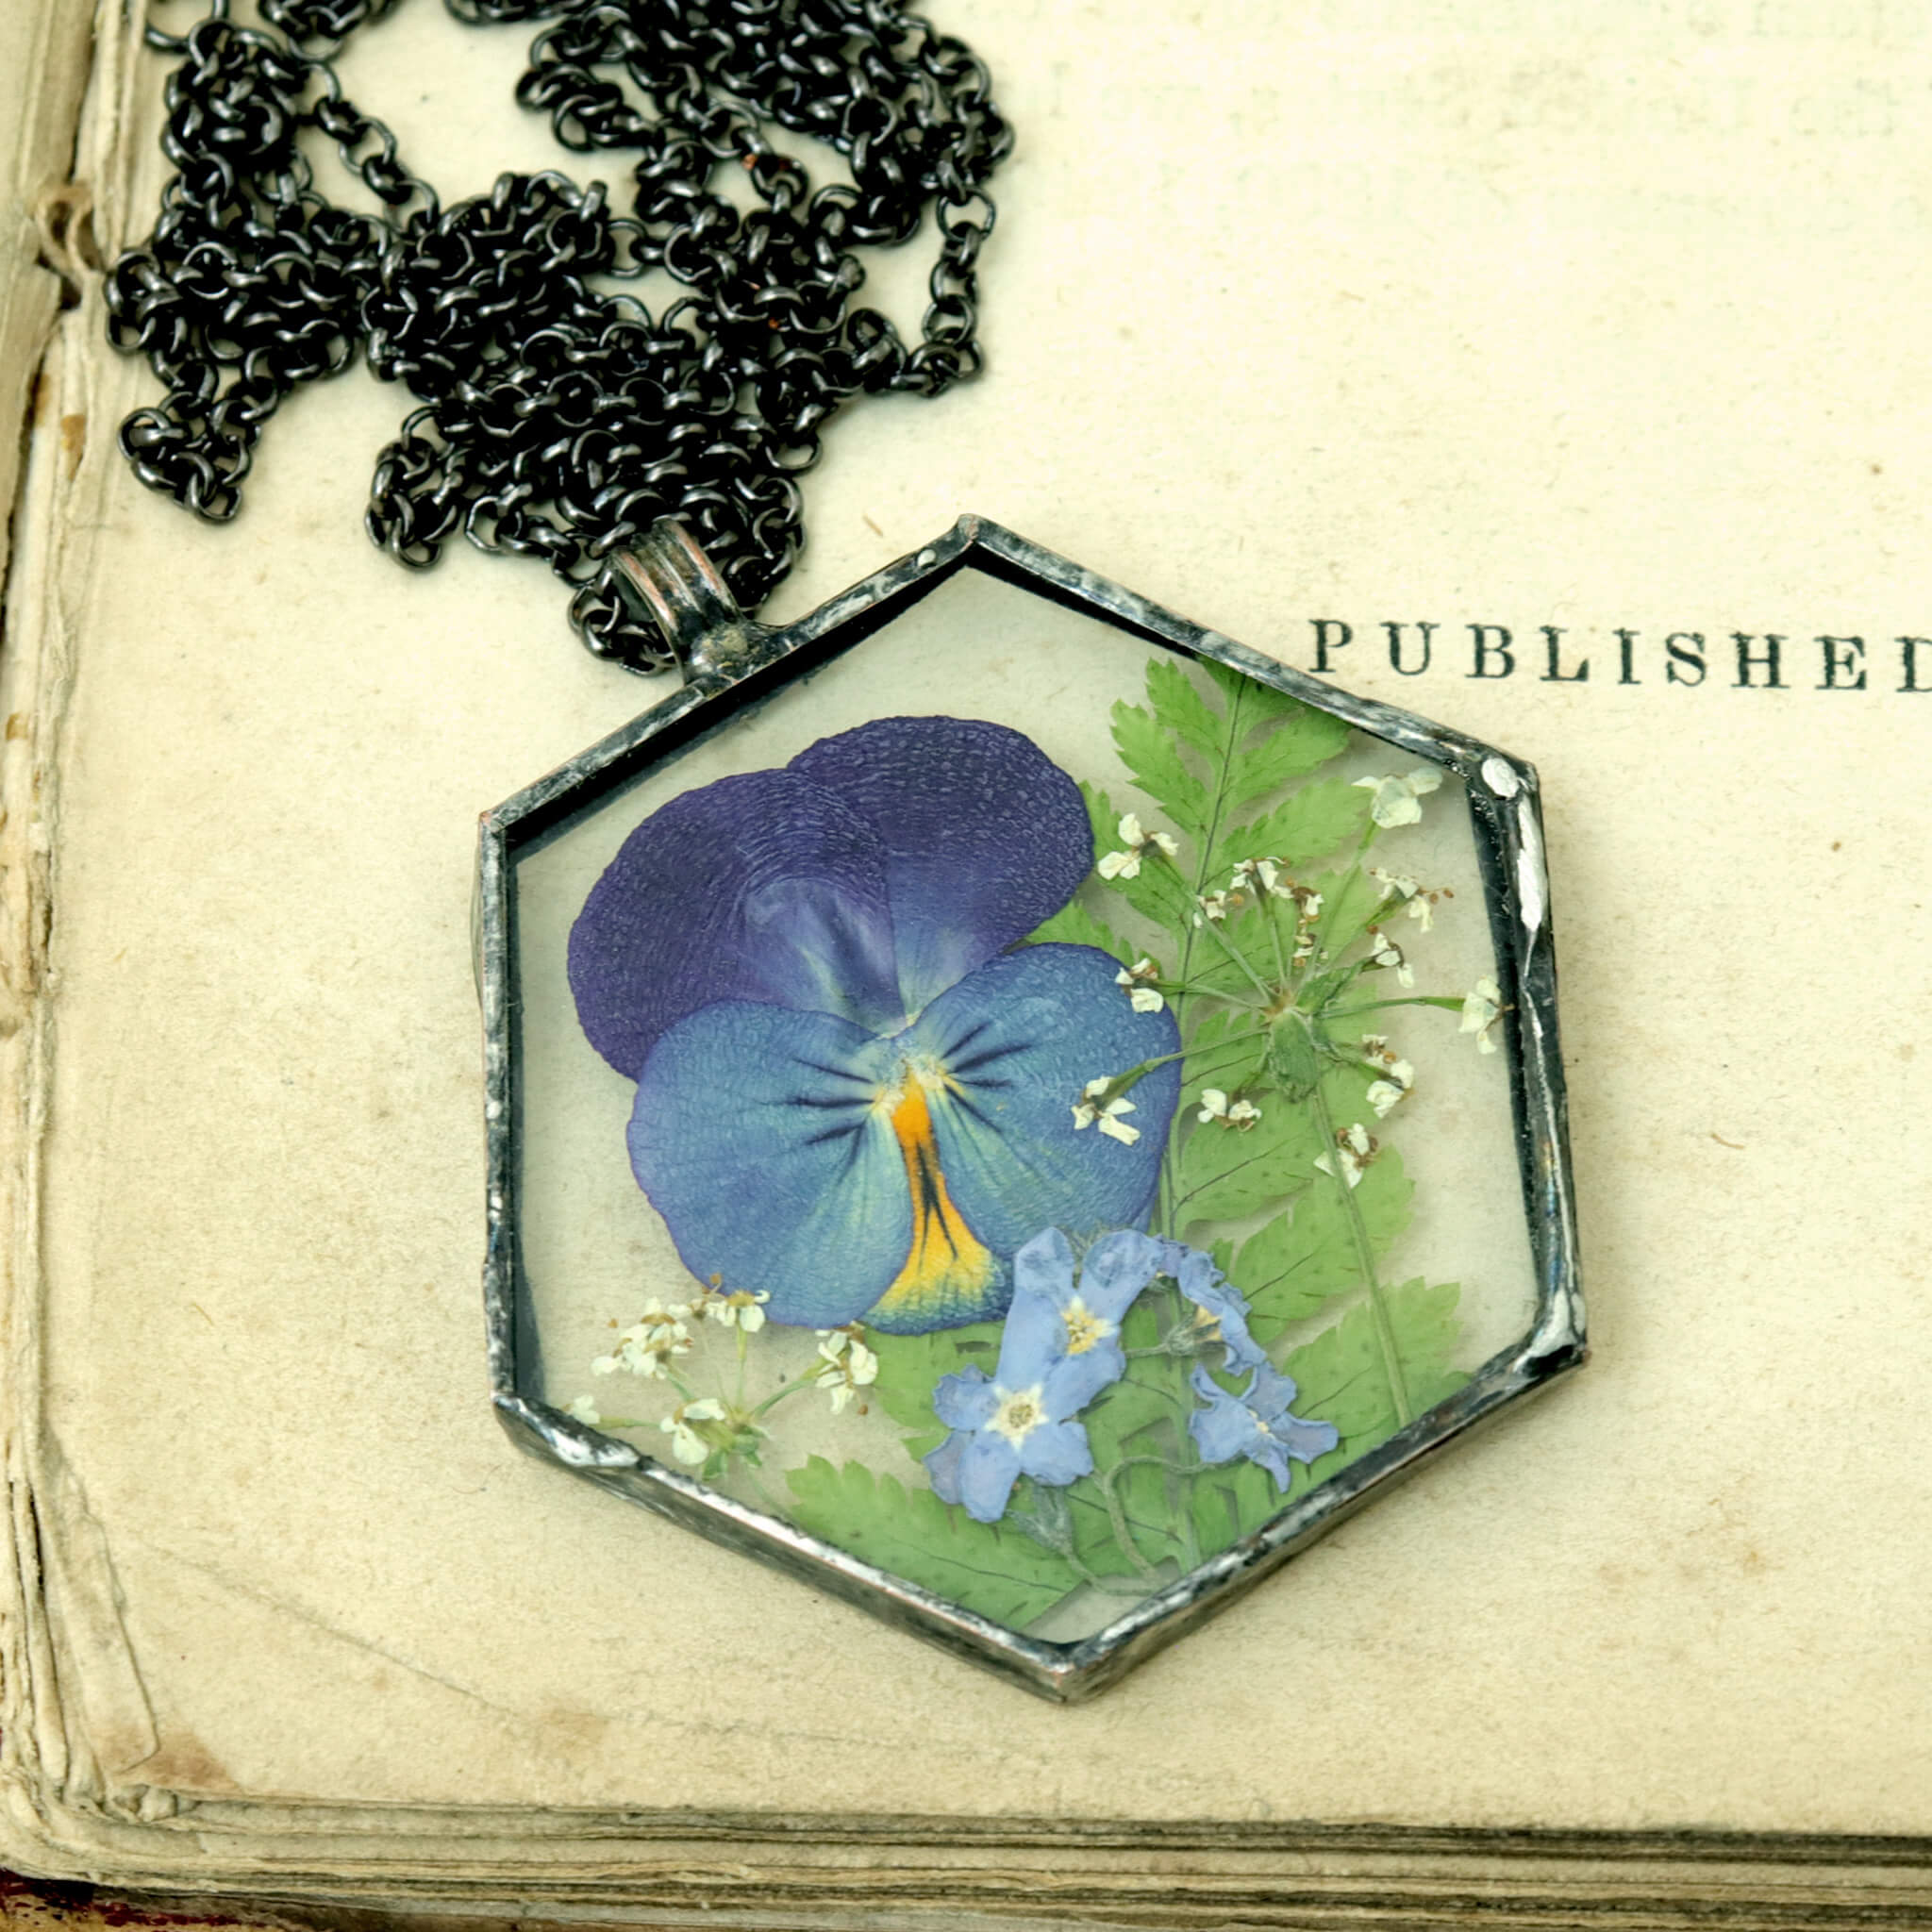 hexagonal violet pansy necklace lying on an old book